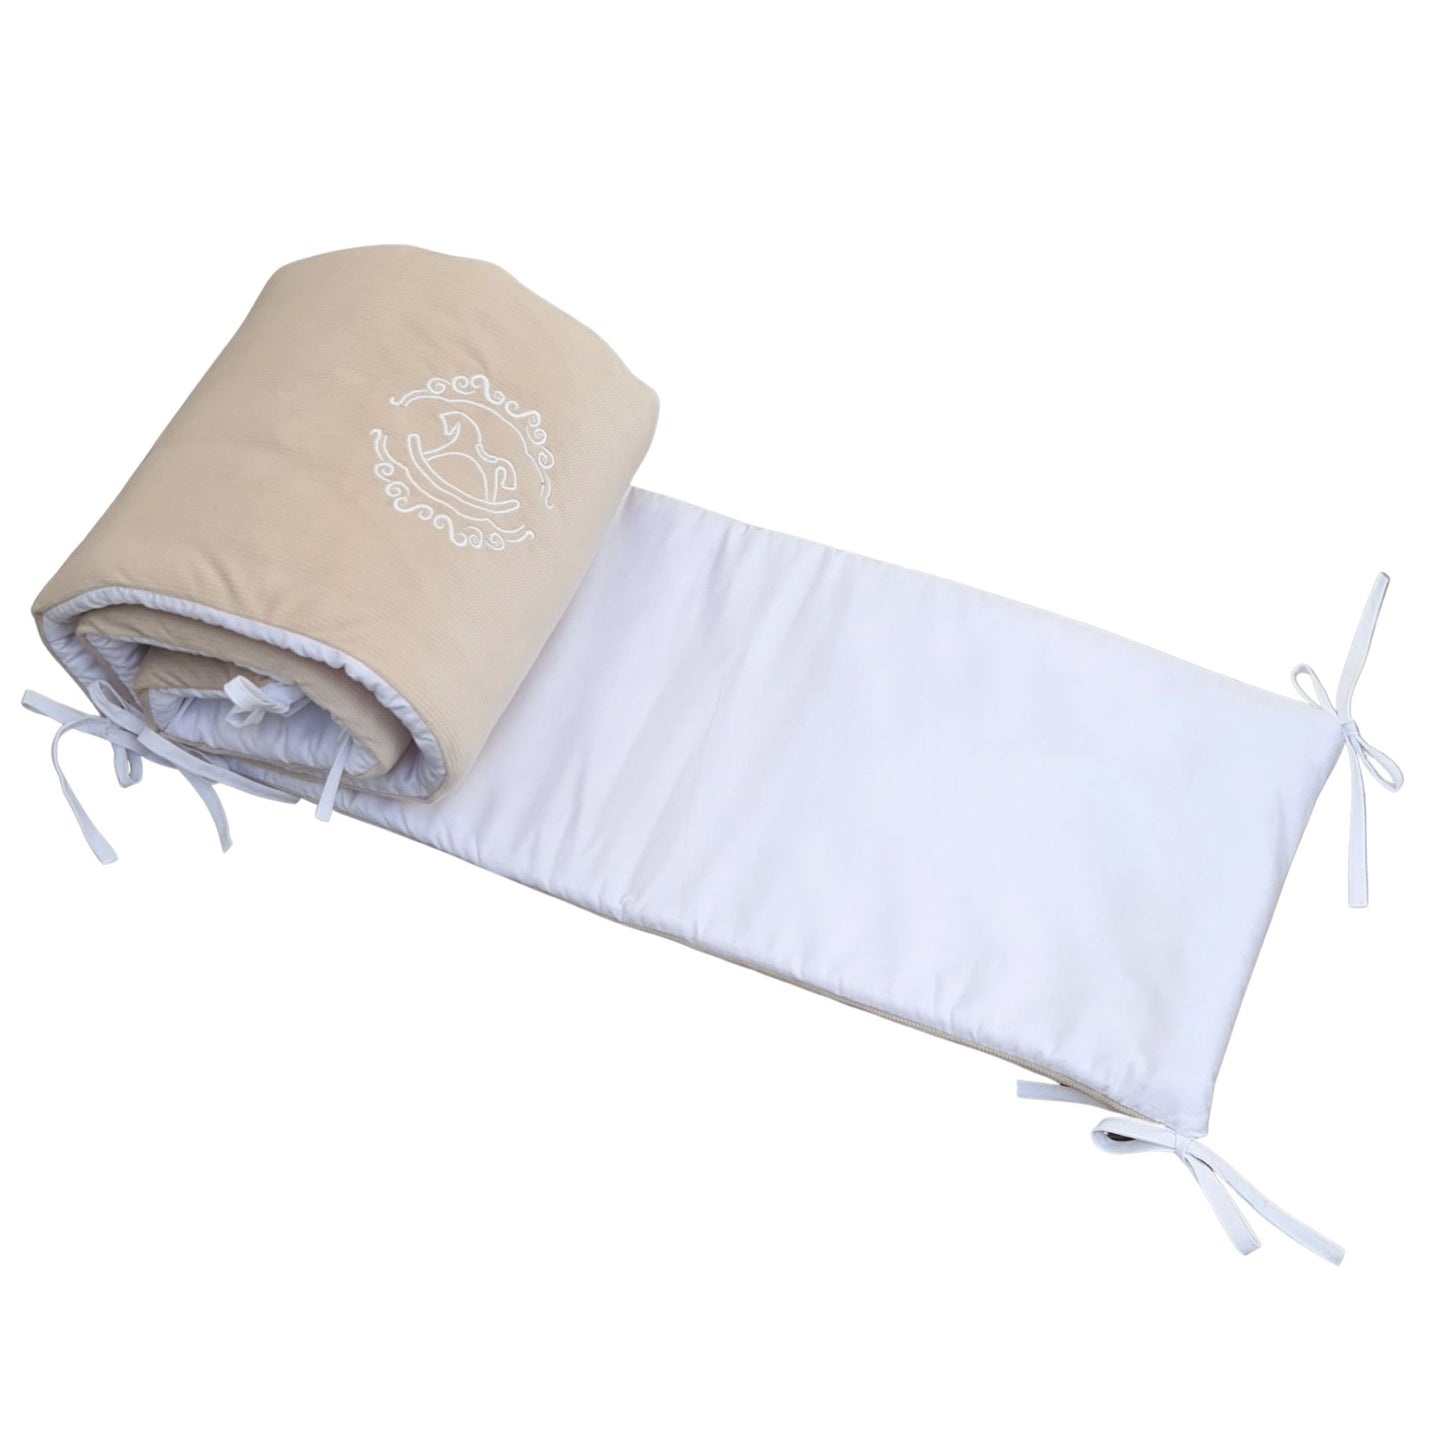 bumper for cot bed crib protectors for cot sides padded liners for cot with rocking horse embroidery beige